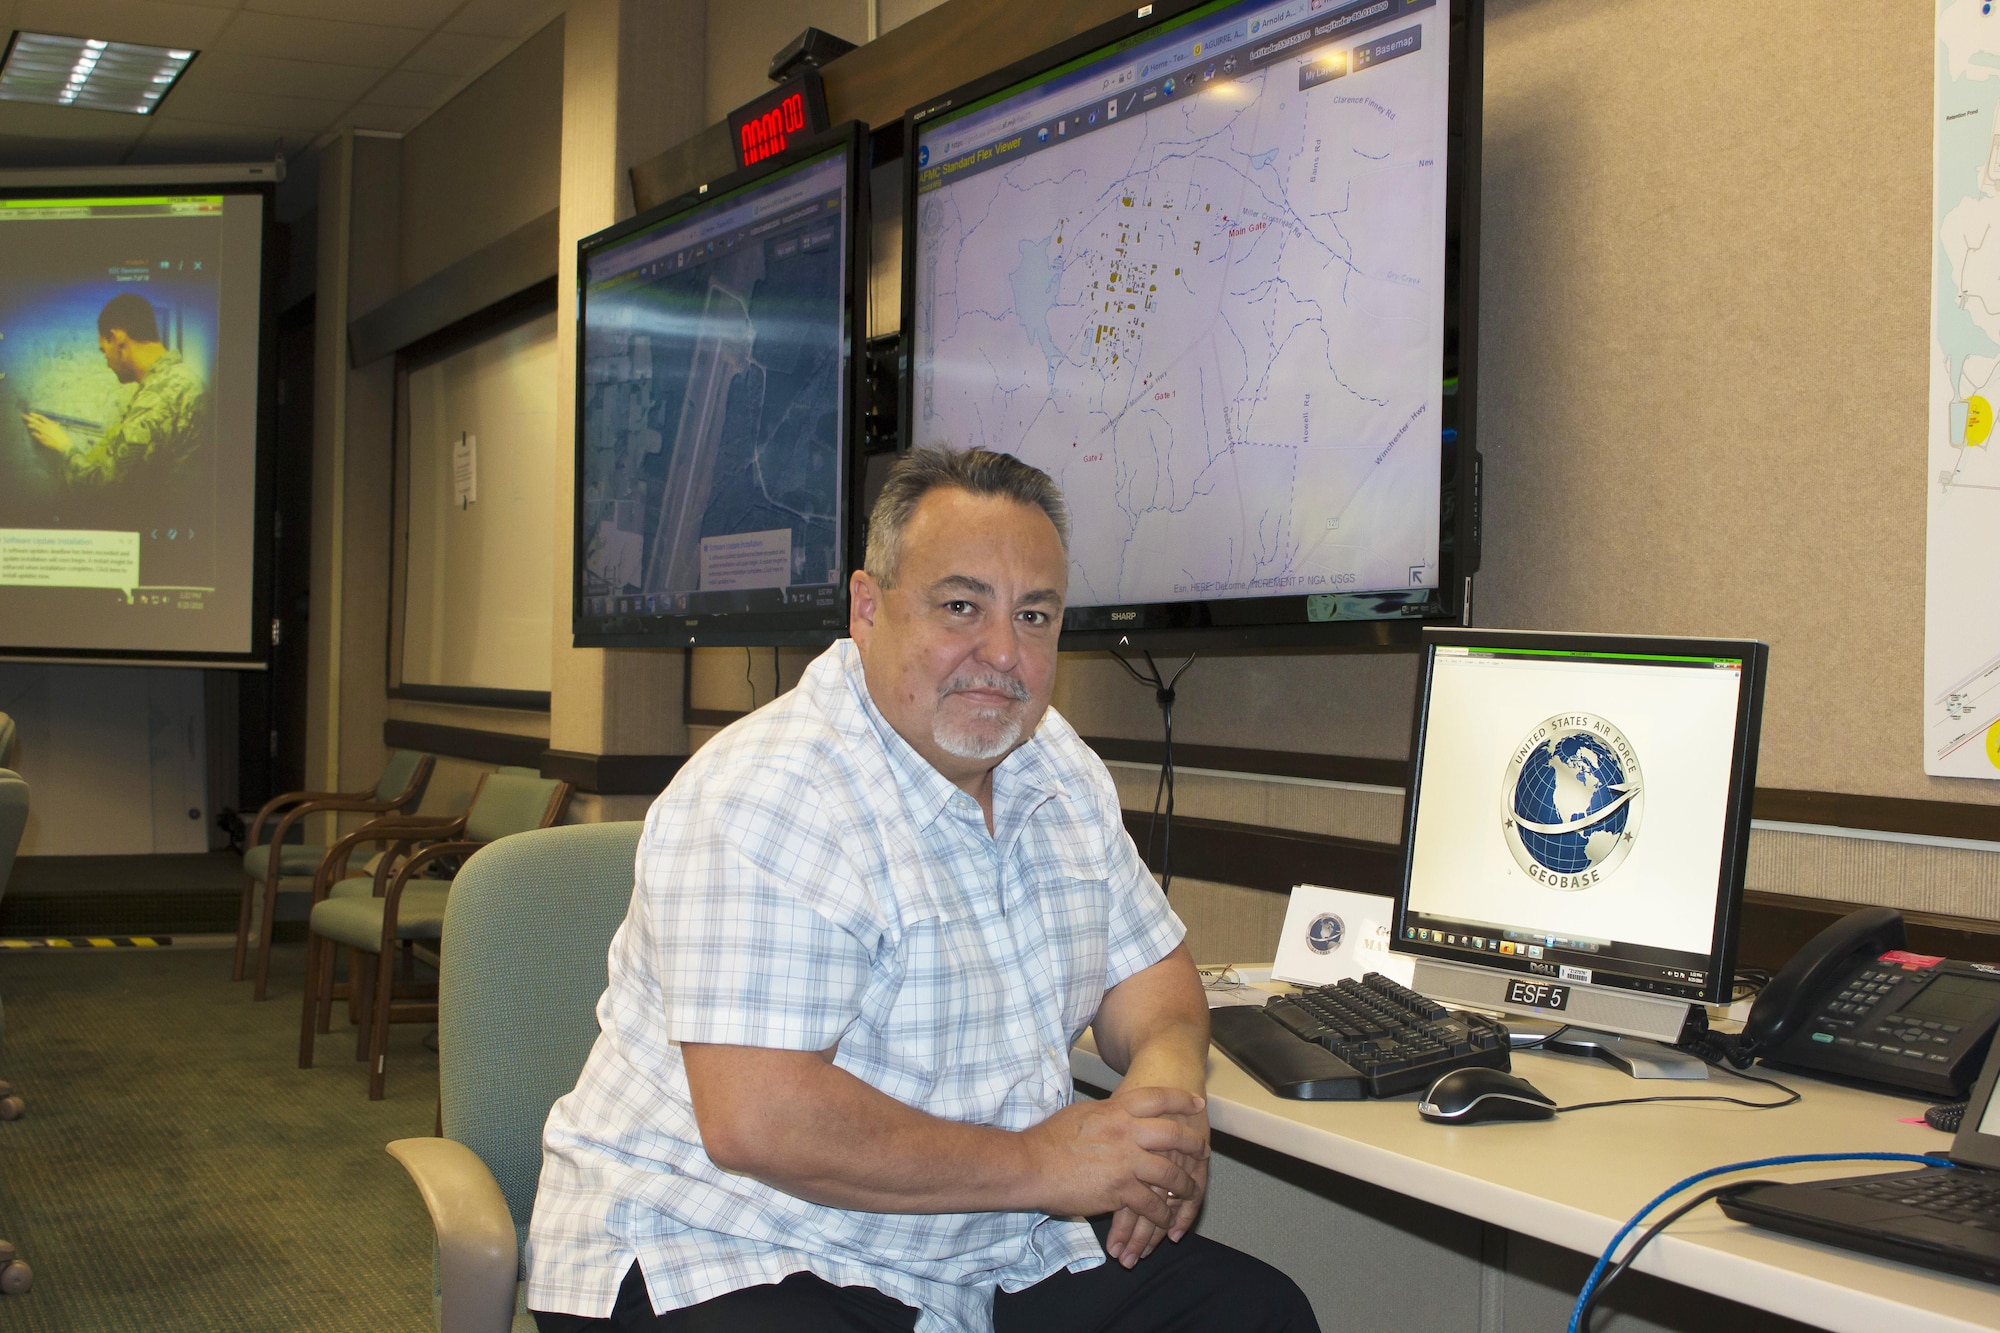 Armando Aguirre serves as the geospatial information specialist and Geospatial Information Office manager at AEDC, where he manages and provides geographic data for the AEDC region. (U.S. Air Force photos/Holly Peterson)